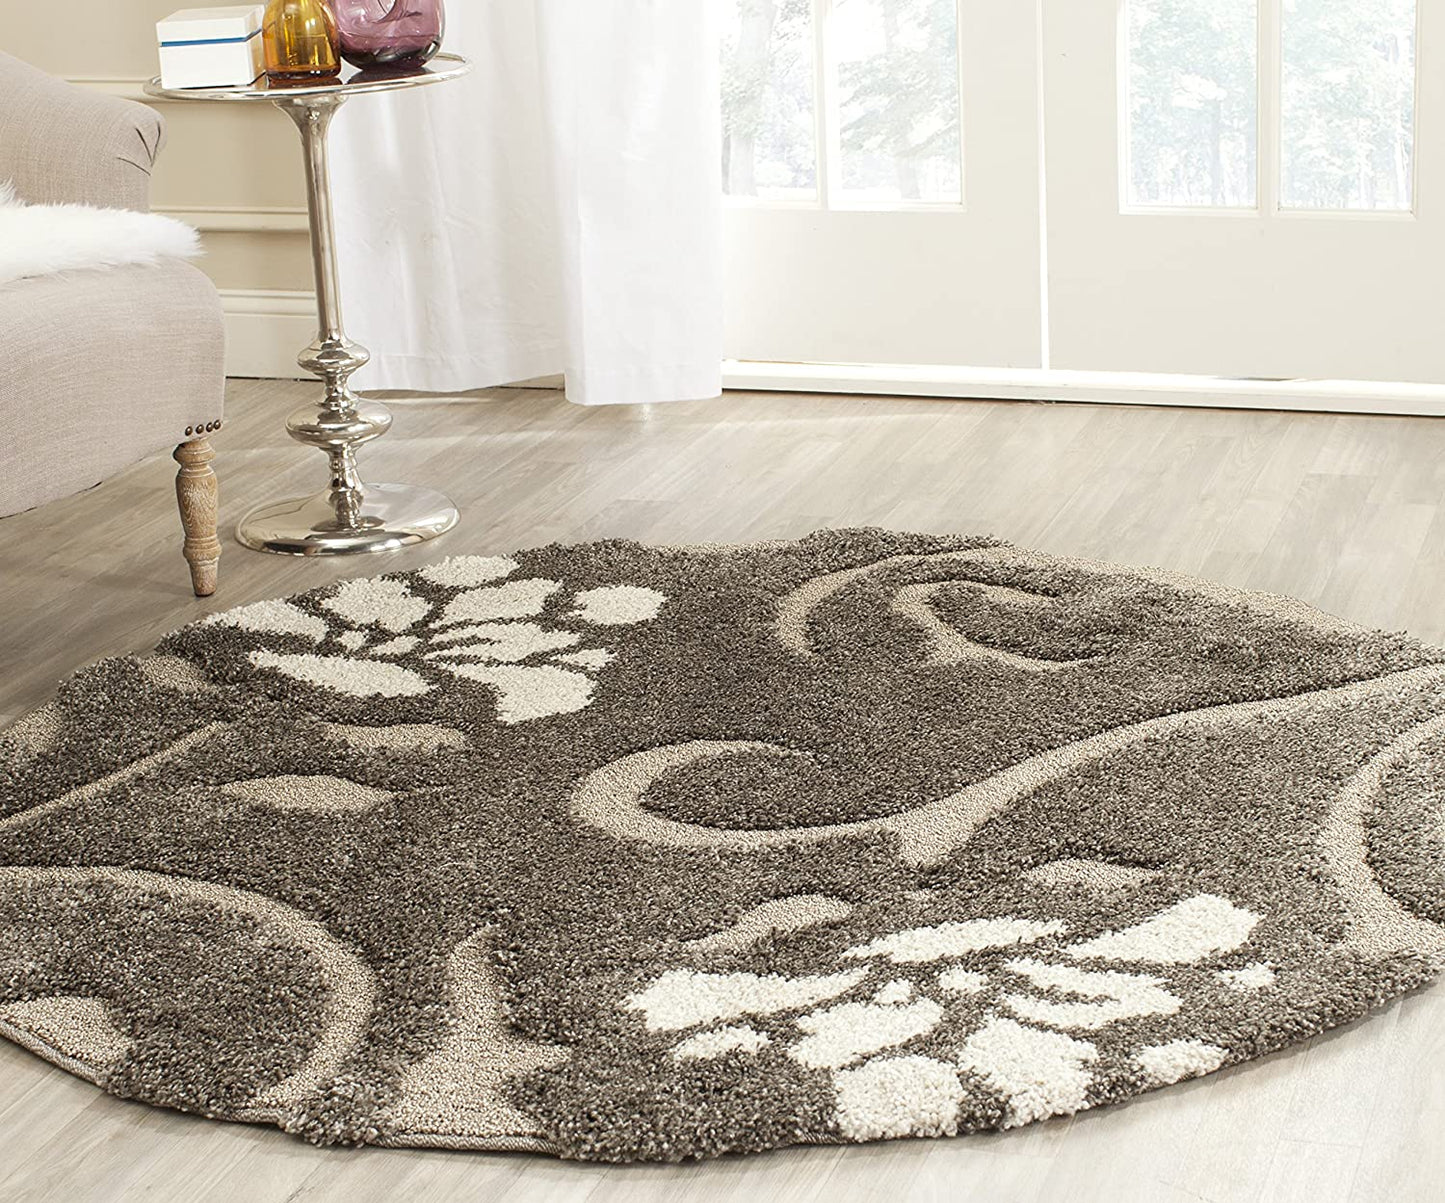 Smoke and Beige Floral Shag Area Rug